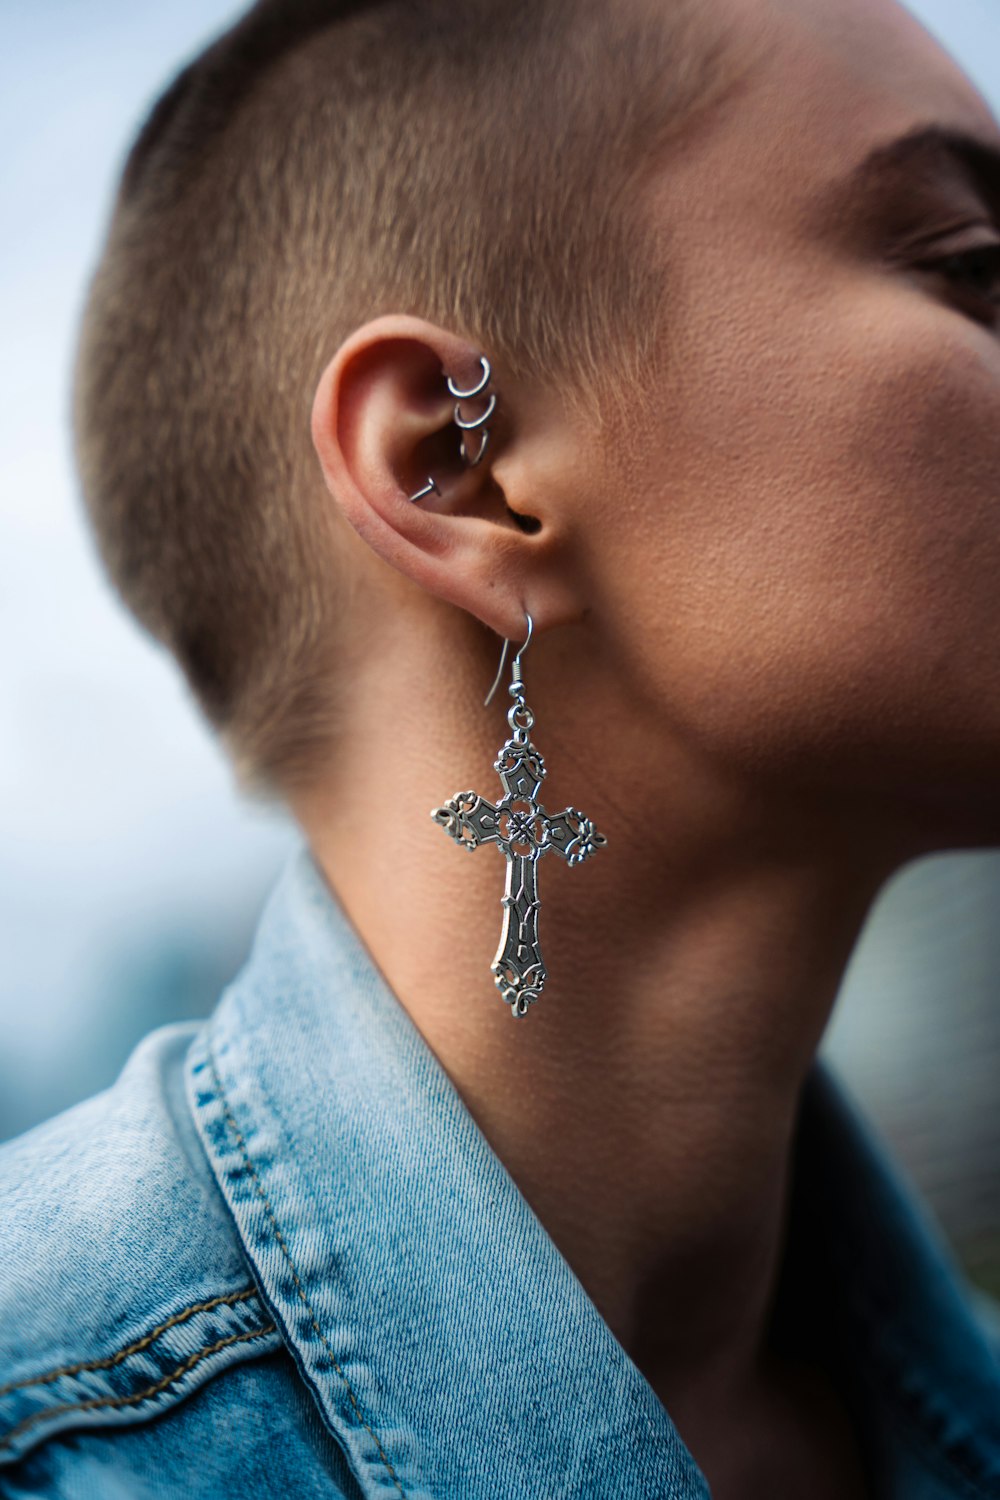 a close up of a person wearing a cross earring